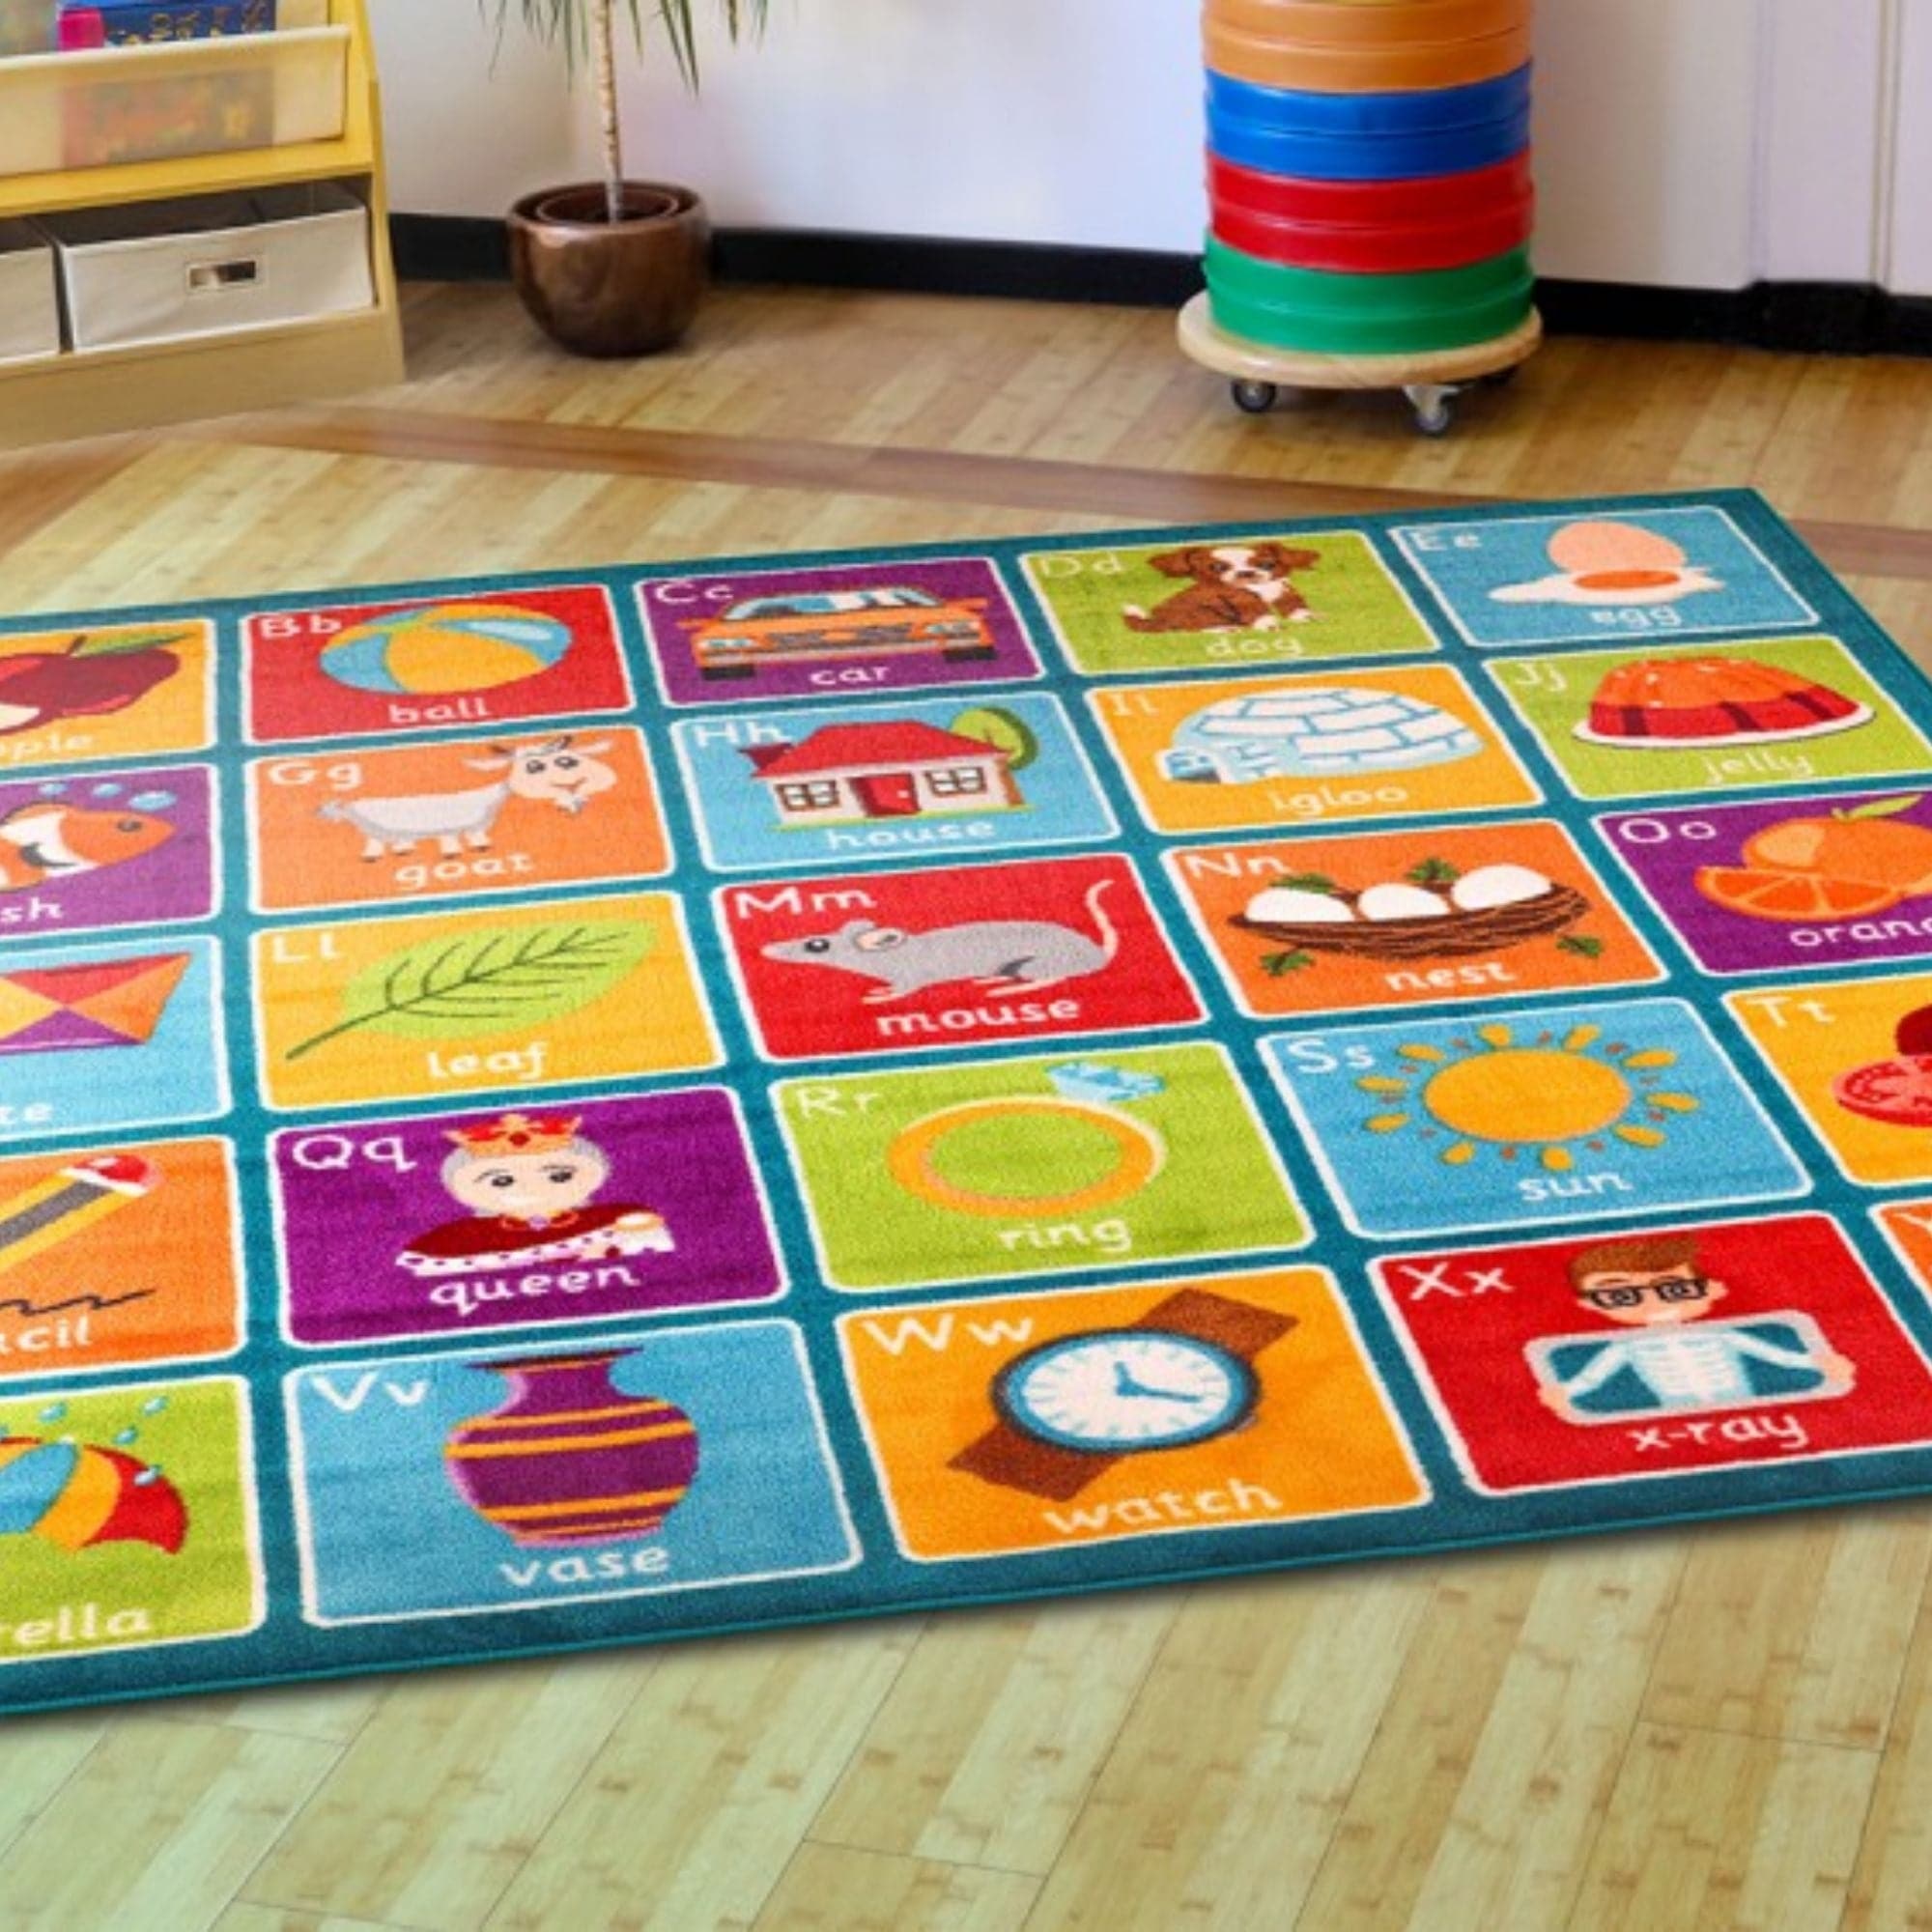 Alphabet Square Carpet, This Square Alphabet Carpet is perfect for children to sit and enhance learning word and letter recognition in a fun interactive way. The Square Alphabet Carpet features distinctive and brightly coloured, child friendly designs The Square Alphabet Carpet is designed specifically with Key Stage 1, Literacy curriculum relevance in mind. Word, letter and picture associations using clearly identifiable Infant font in upper and lowercase. The Alphabet Square Carpet is a large colourful 2 